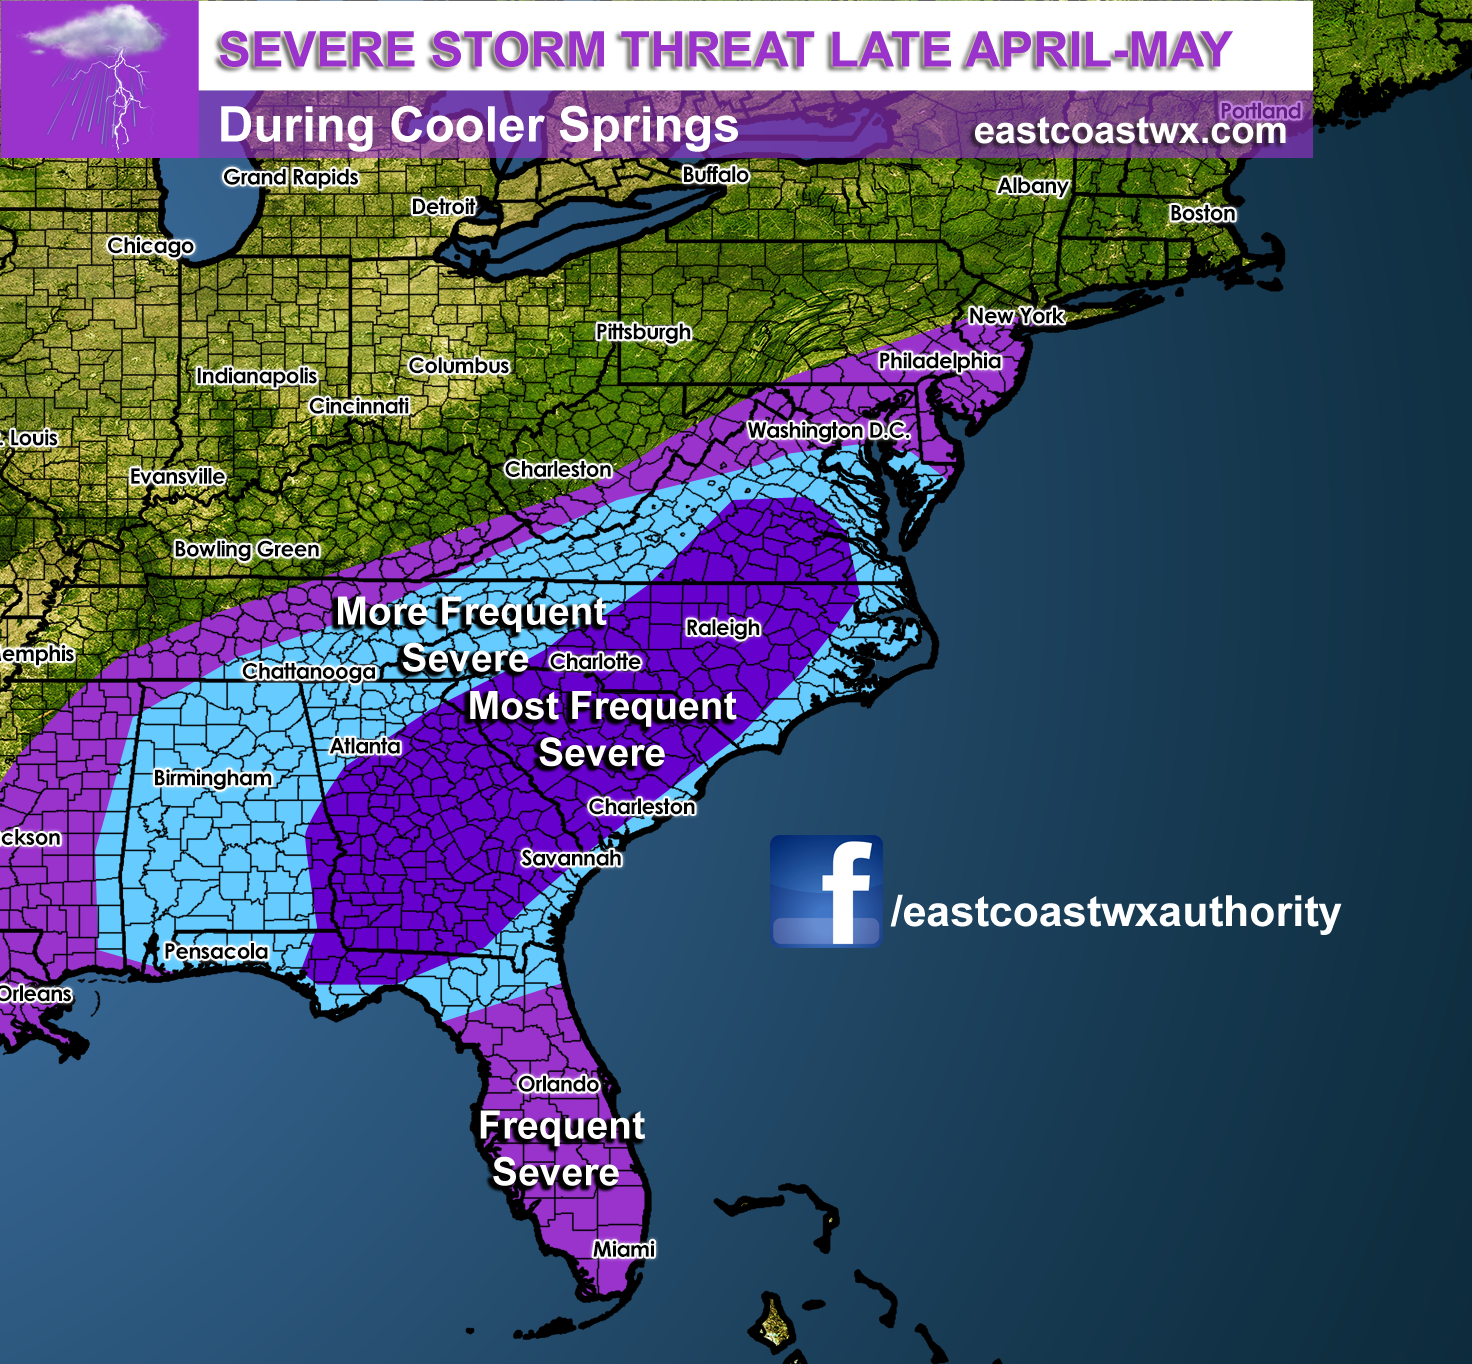 Frequent Severe Storms Likely During Cooler Springs - Carolina Weather Authority